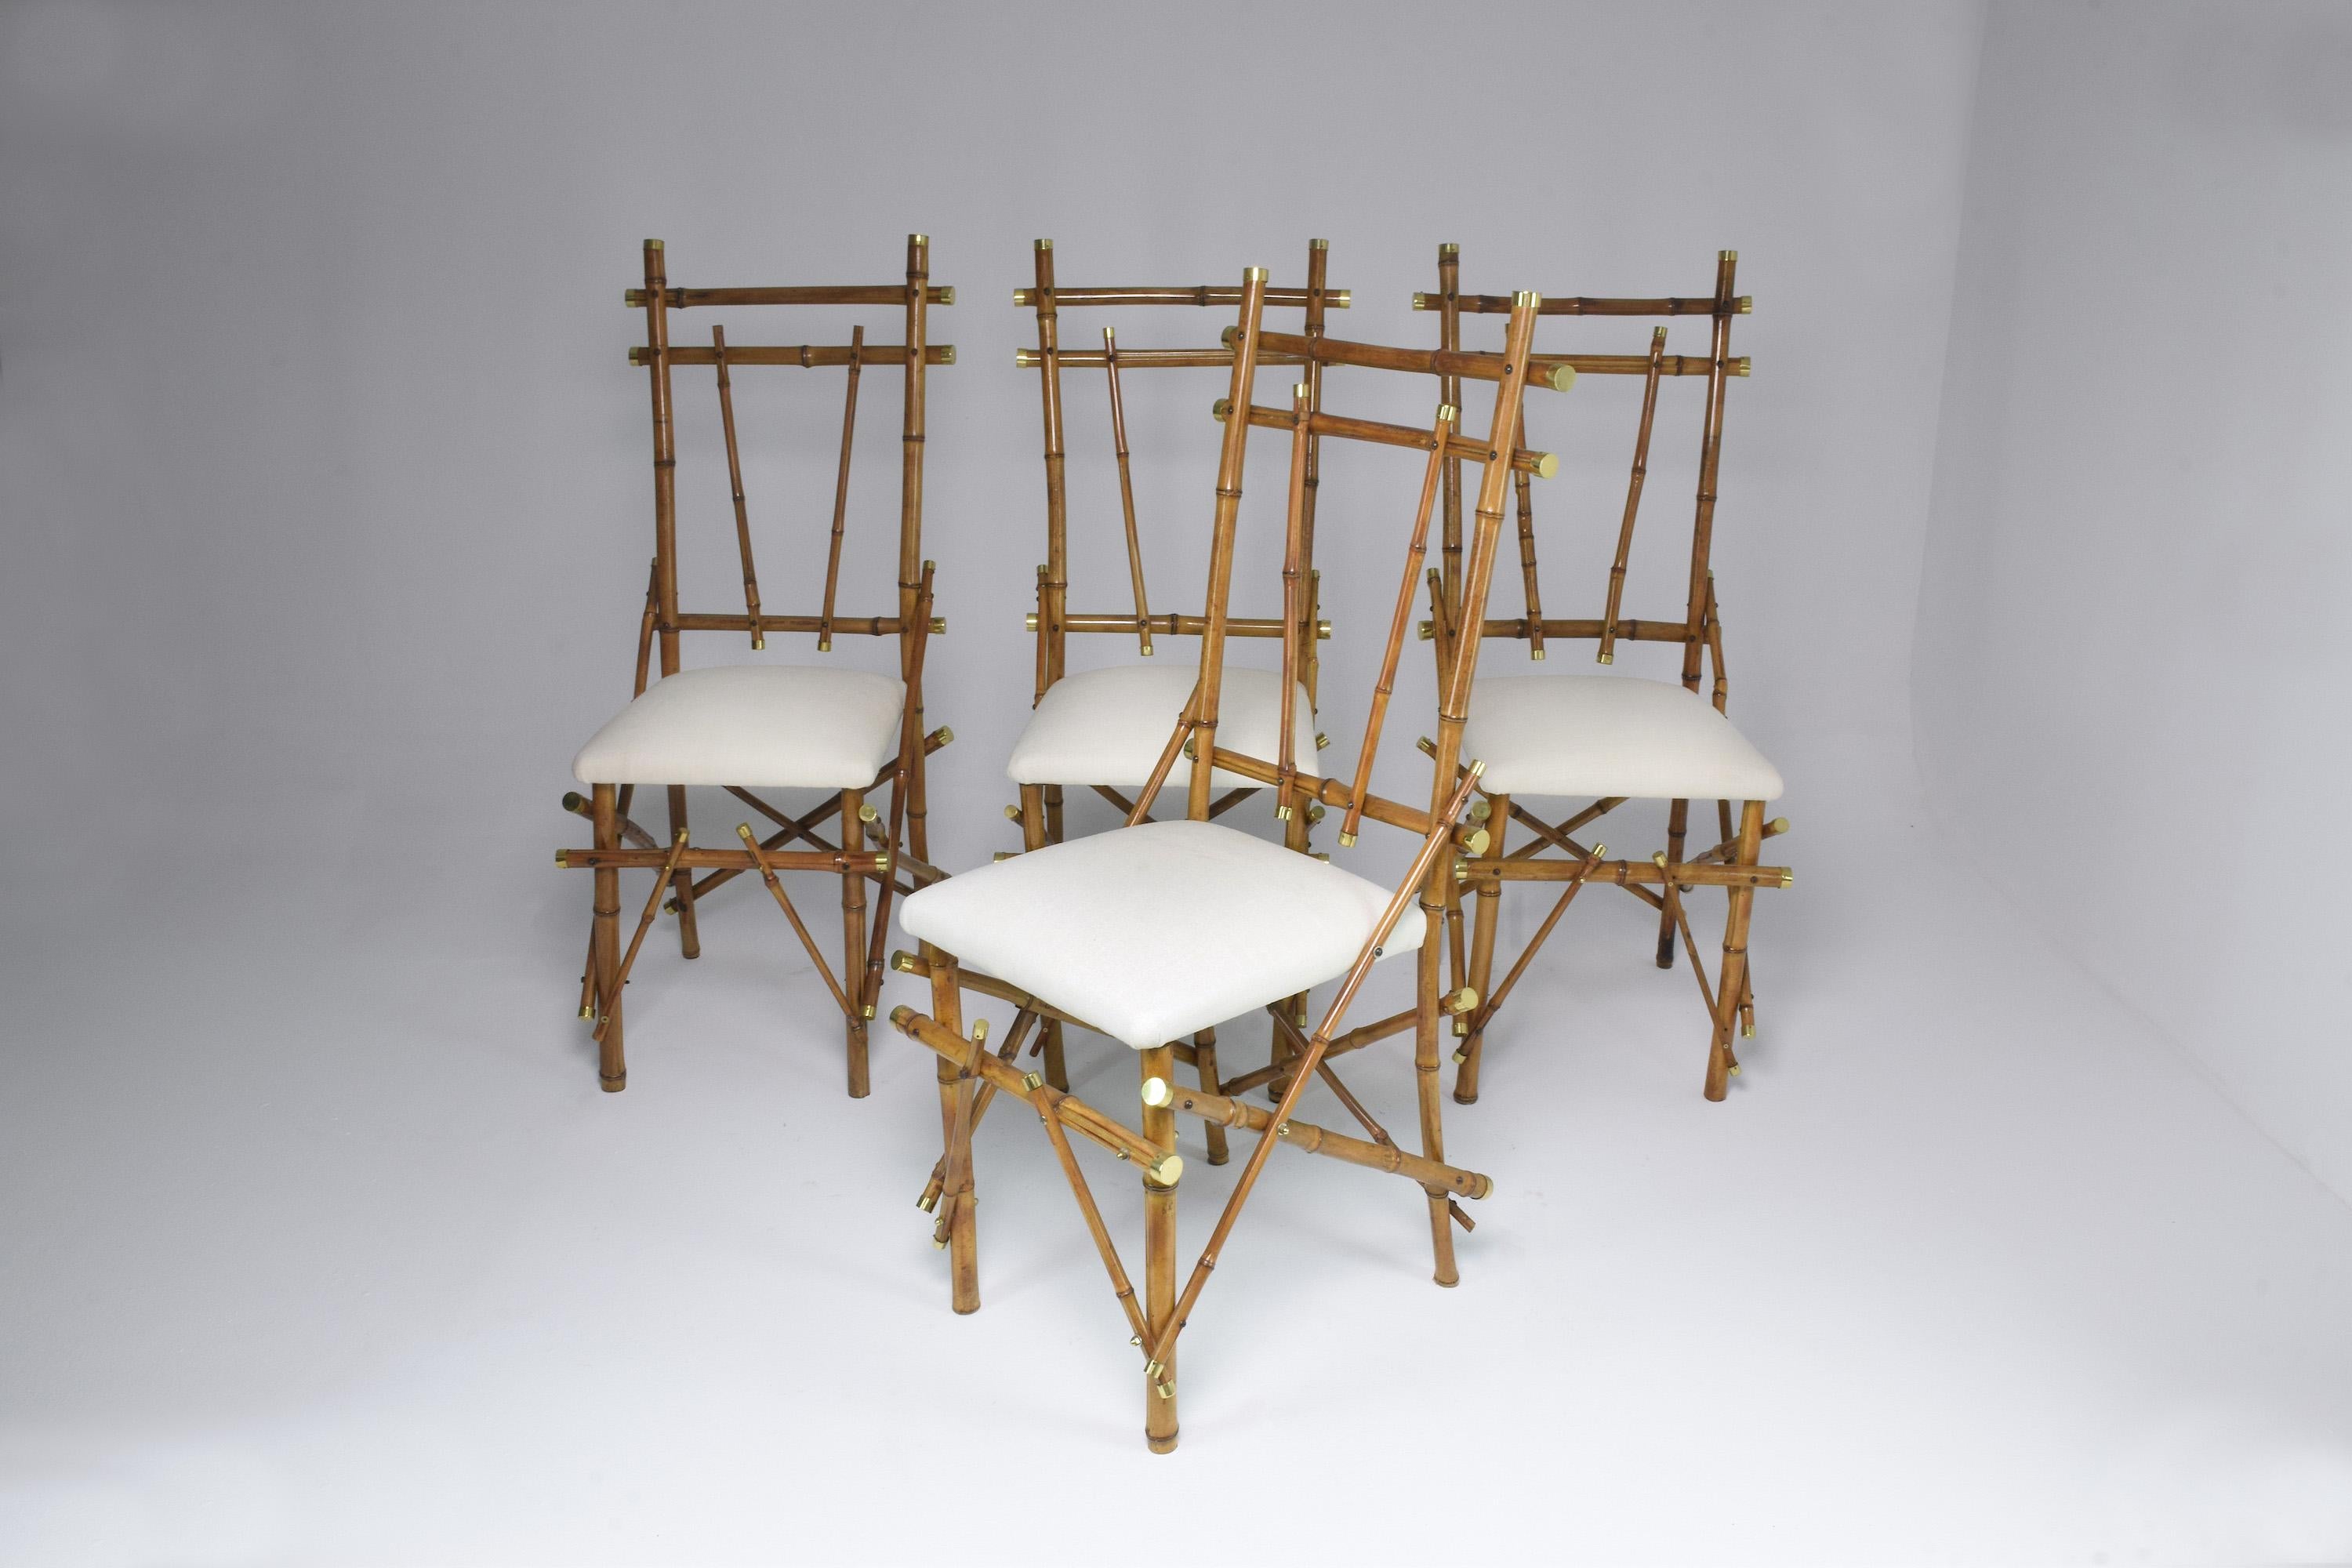 A 20th century set of 4 Italian dining chairs designed with high backrests and bamboo wood structured panels and criss-cross shapes. The polished brass endings give these fantastic collectible chairs a chic touch. In Gabriella Crespi style. 
Italy.